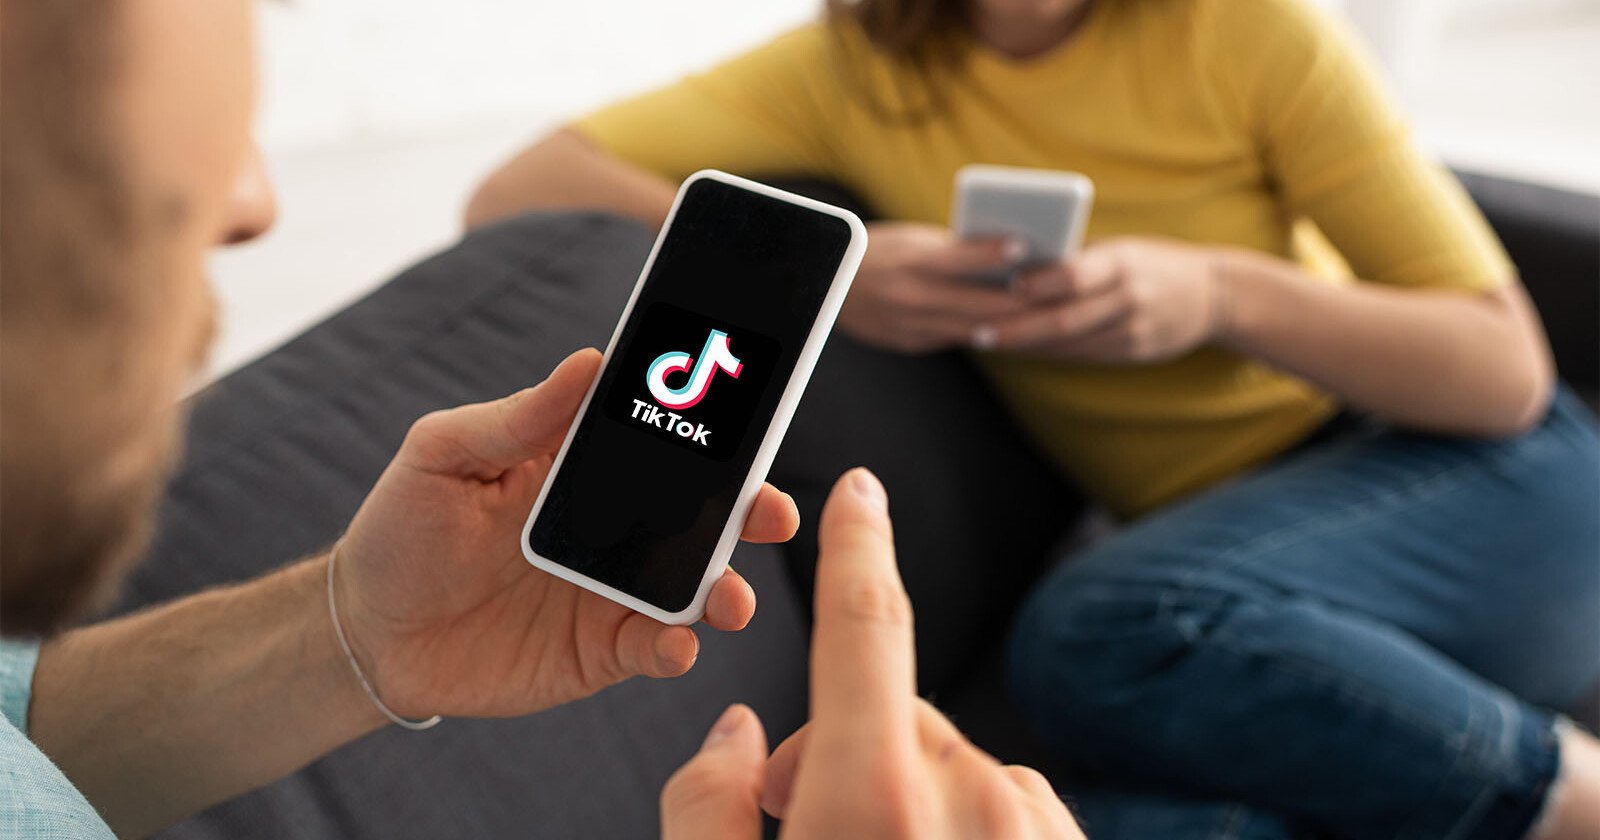 A man and a woman sitting on a sofa, each using their smartphones. the man's phone, held in his hand, displays the tiktok logo on its screen. focus on the man's phone screen.